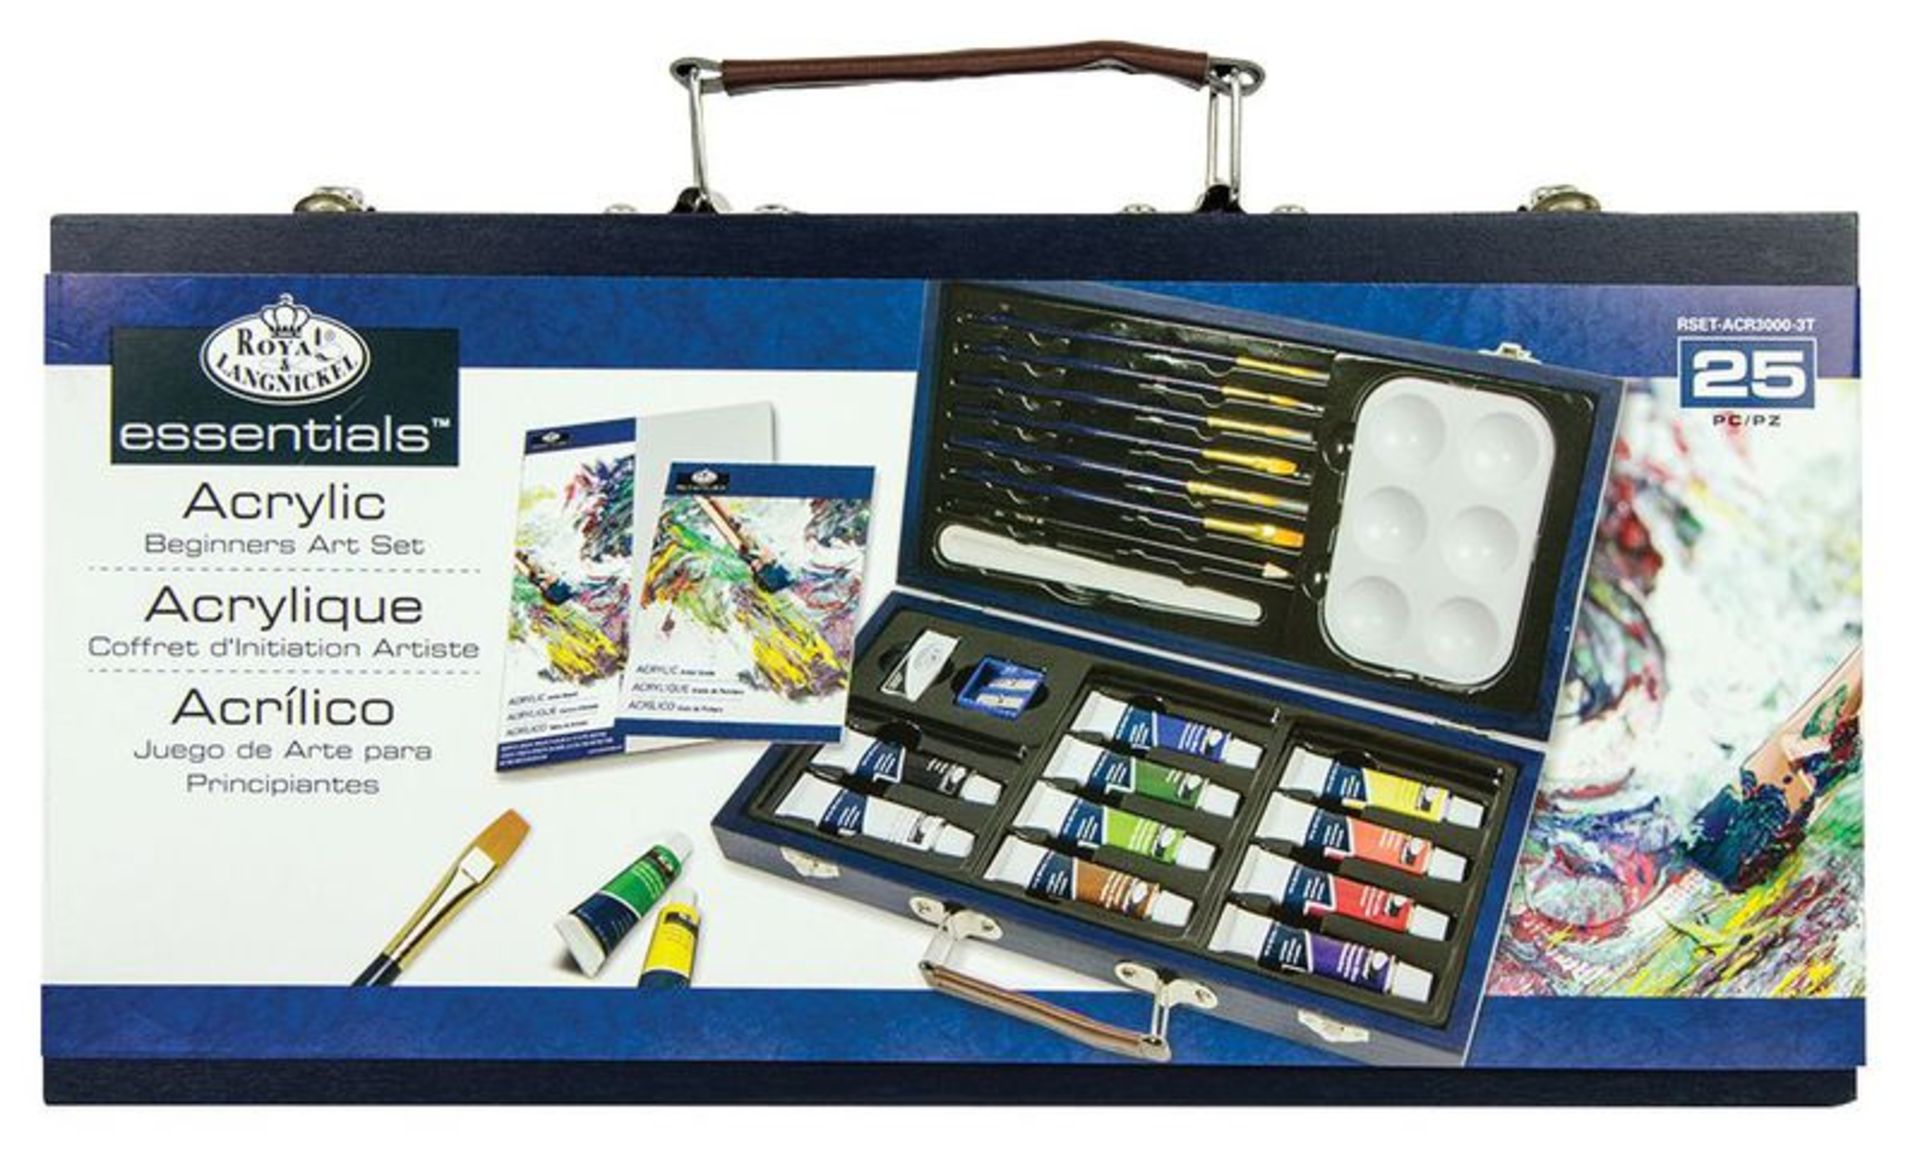 V Brand New Royal Langnickel 25Pce Acrylic Art Set In Carry Case Inc 10 Acrylic Paints-9 Brushes-